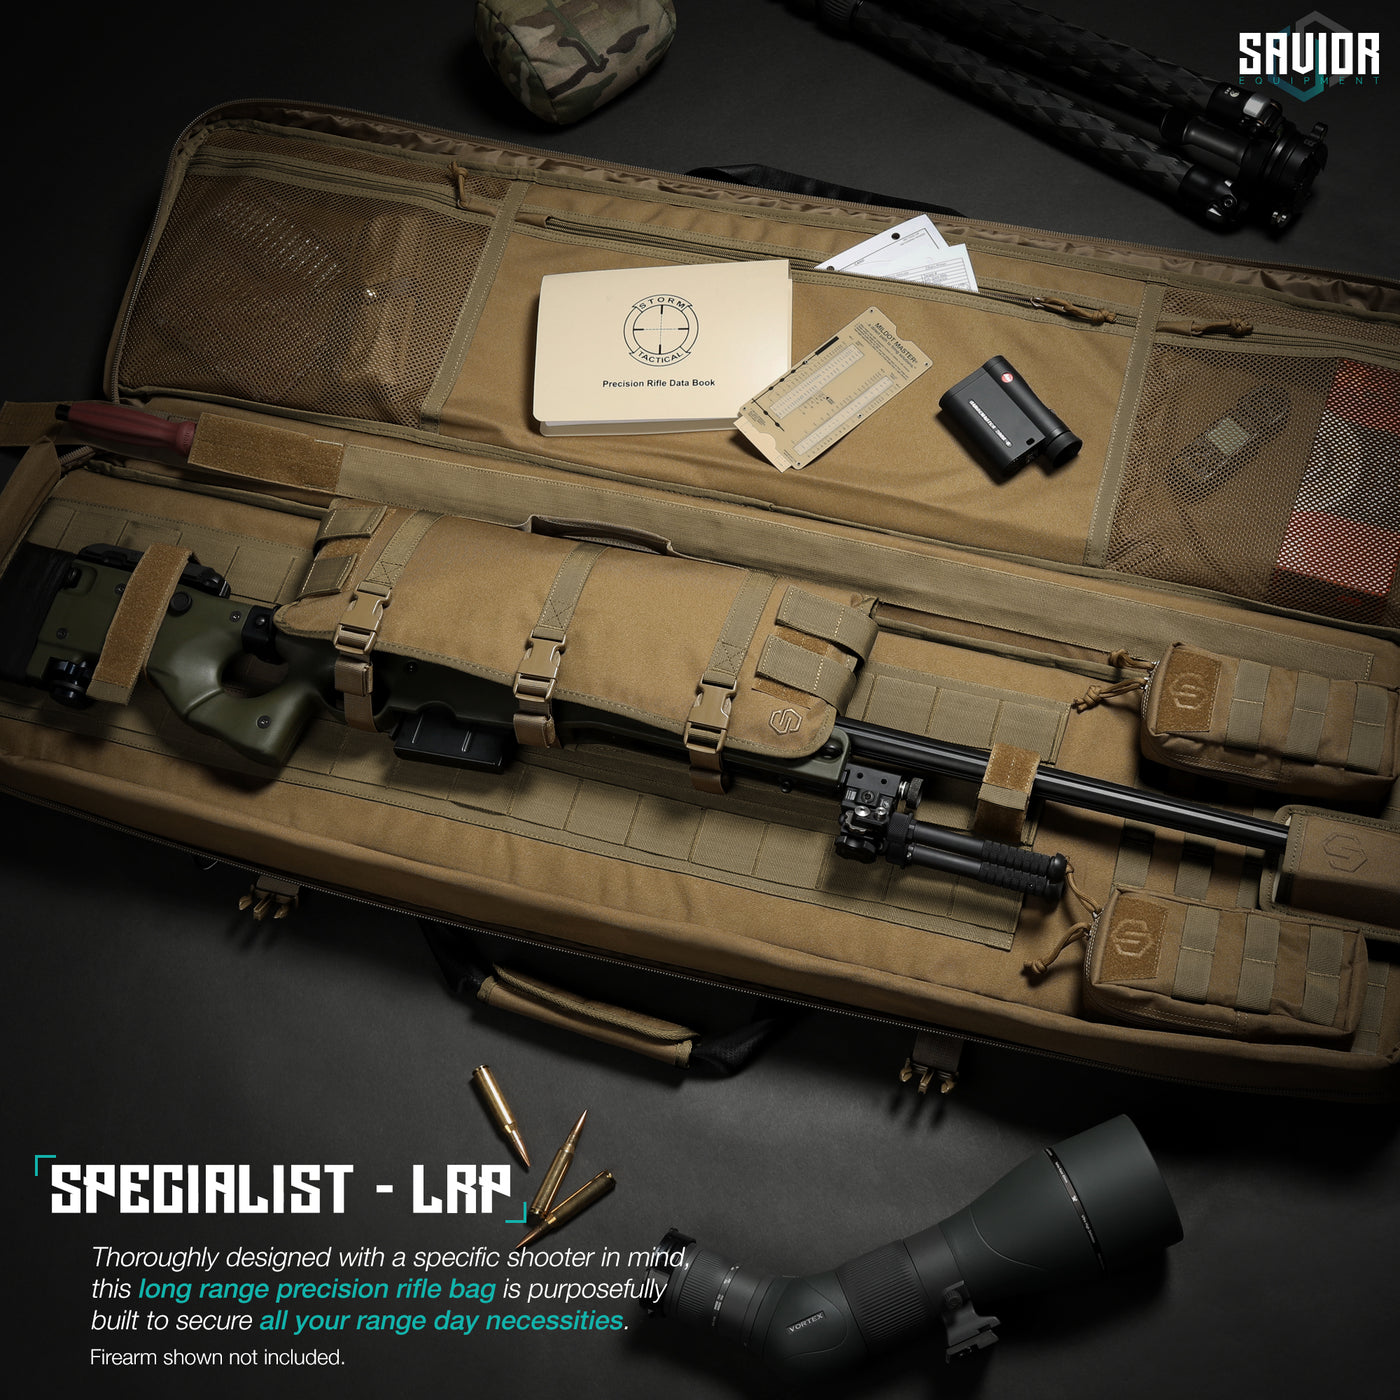 Specialist - LRP - Thoroughly designed with a specific shooter in mind, this long-range precision rifle bag is purposefully built to secure all your range day necessities. Firearms shown not included.